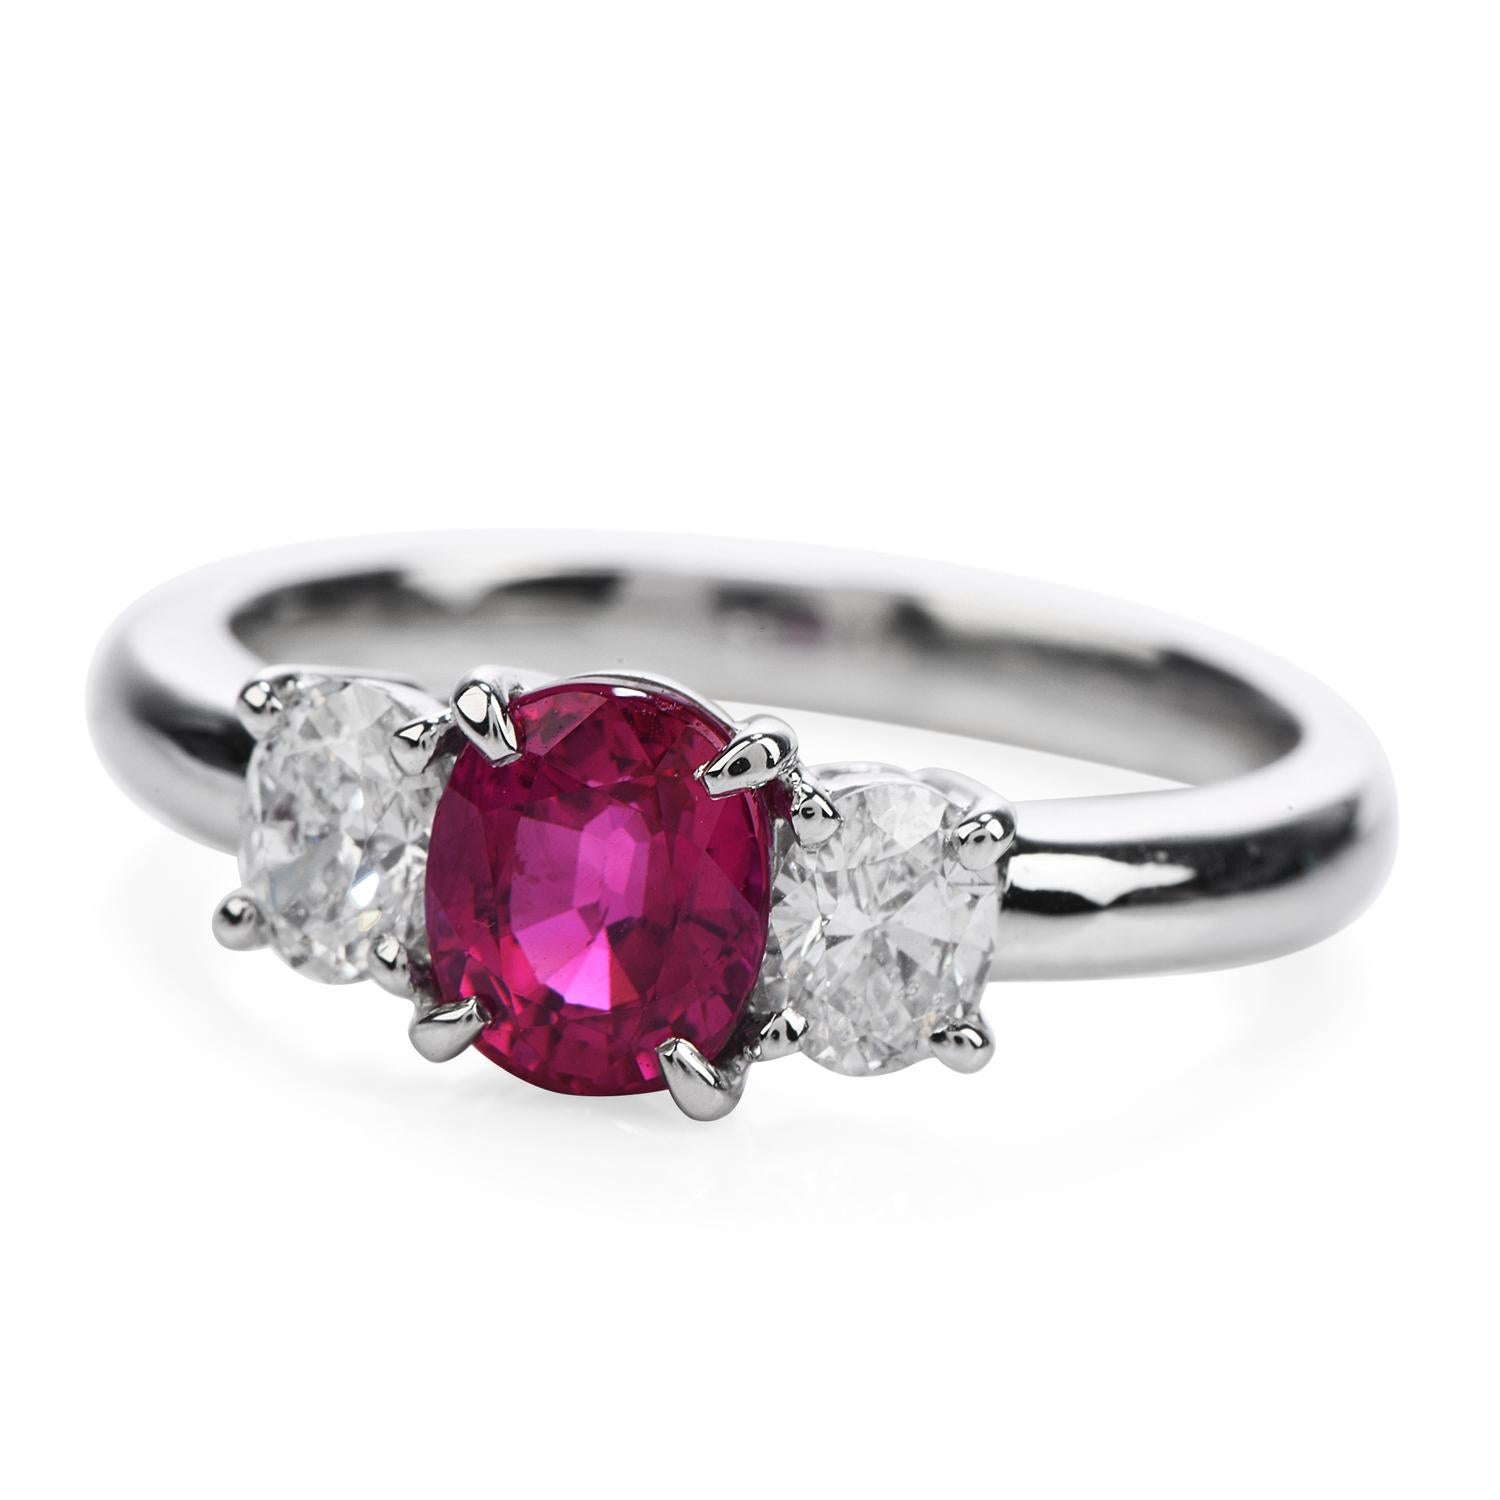 Witness the Delicate touch of color and sparkle on this Engagement Ring!

This elegant Three Stone Style piece is Crafted in Solid Platinum,

weights 5.6 grams and the top measures  12 mm x 6 mm, 5 mm high.

Bringing amazing Bright Red Color there